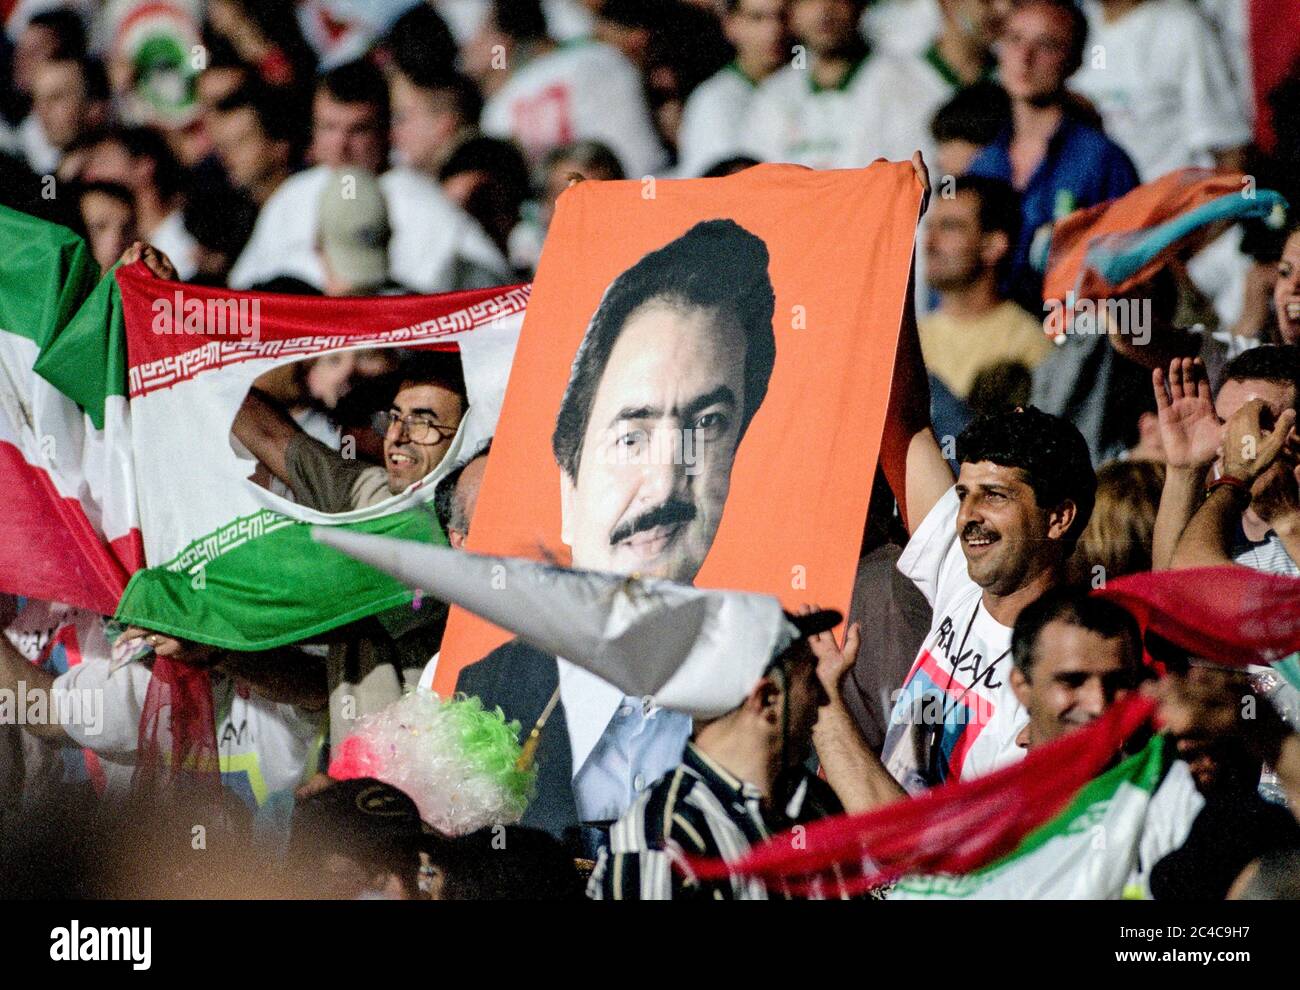 Iranian fan injured in melee after USA vs.Iran 1998 World Cup match in Lyon on June 21 1998 Stock Photo - Alamy